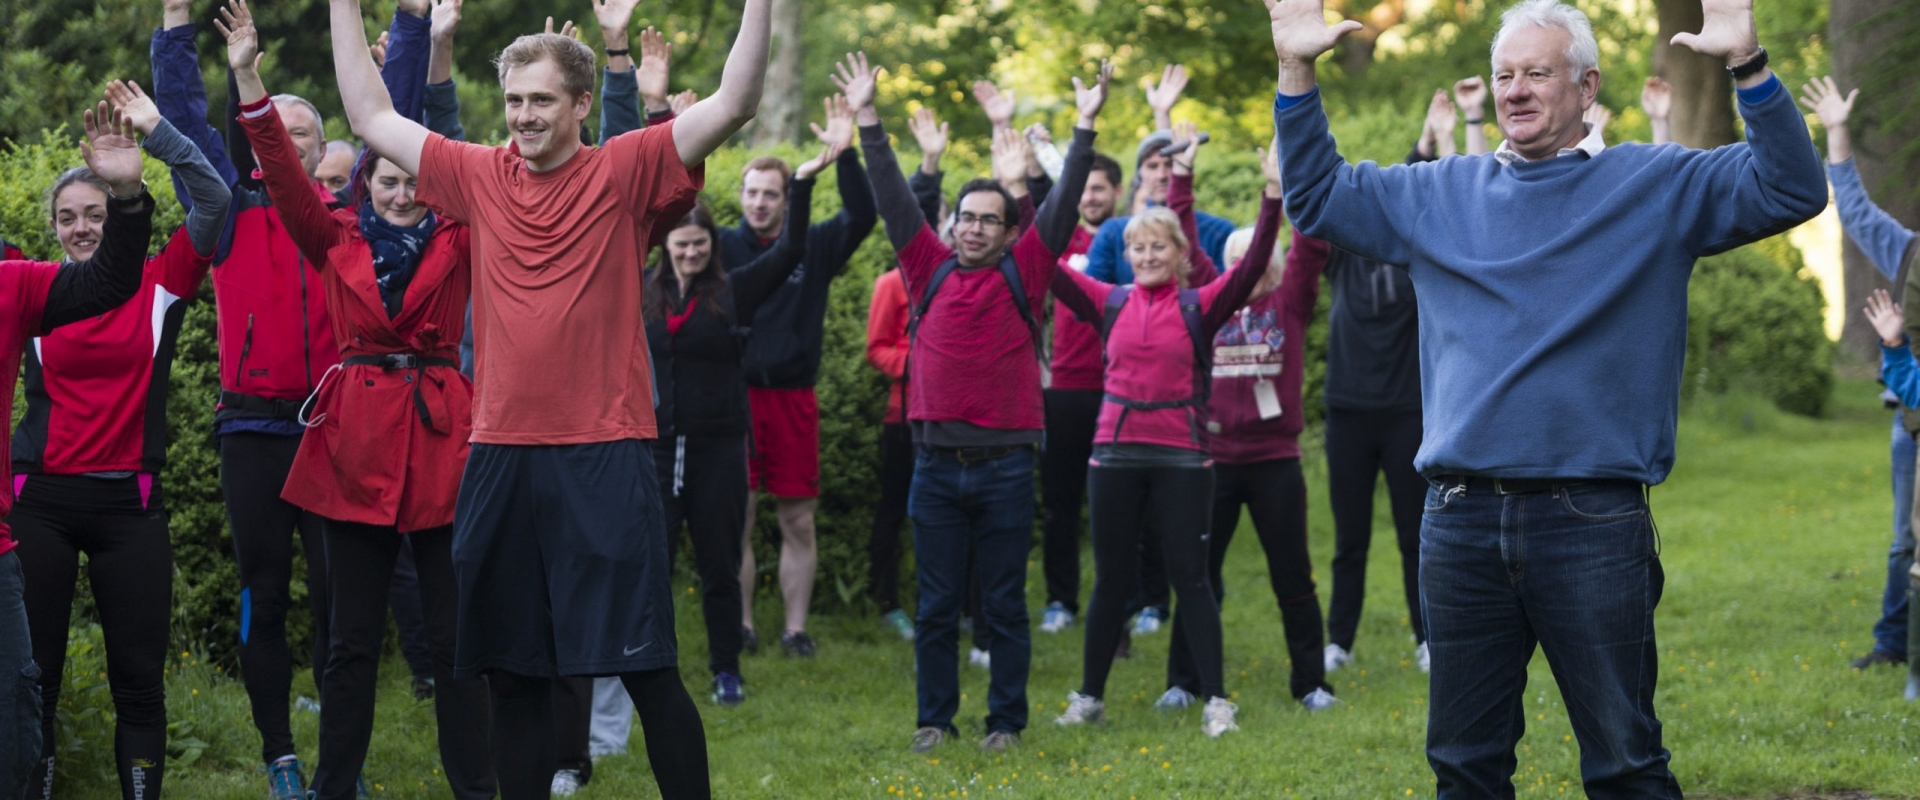 Audience members dressed in red running gear, apart from one chap in a blue jumper and jeans, mid stretch during a warm up routine.